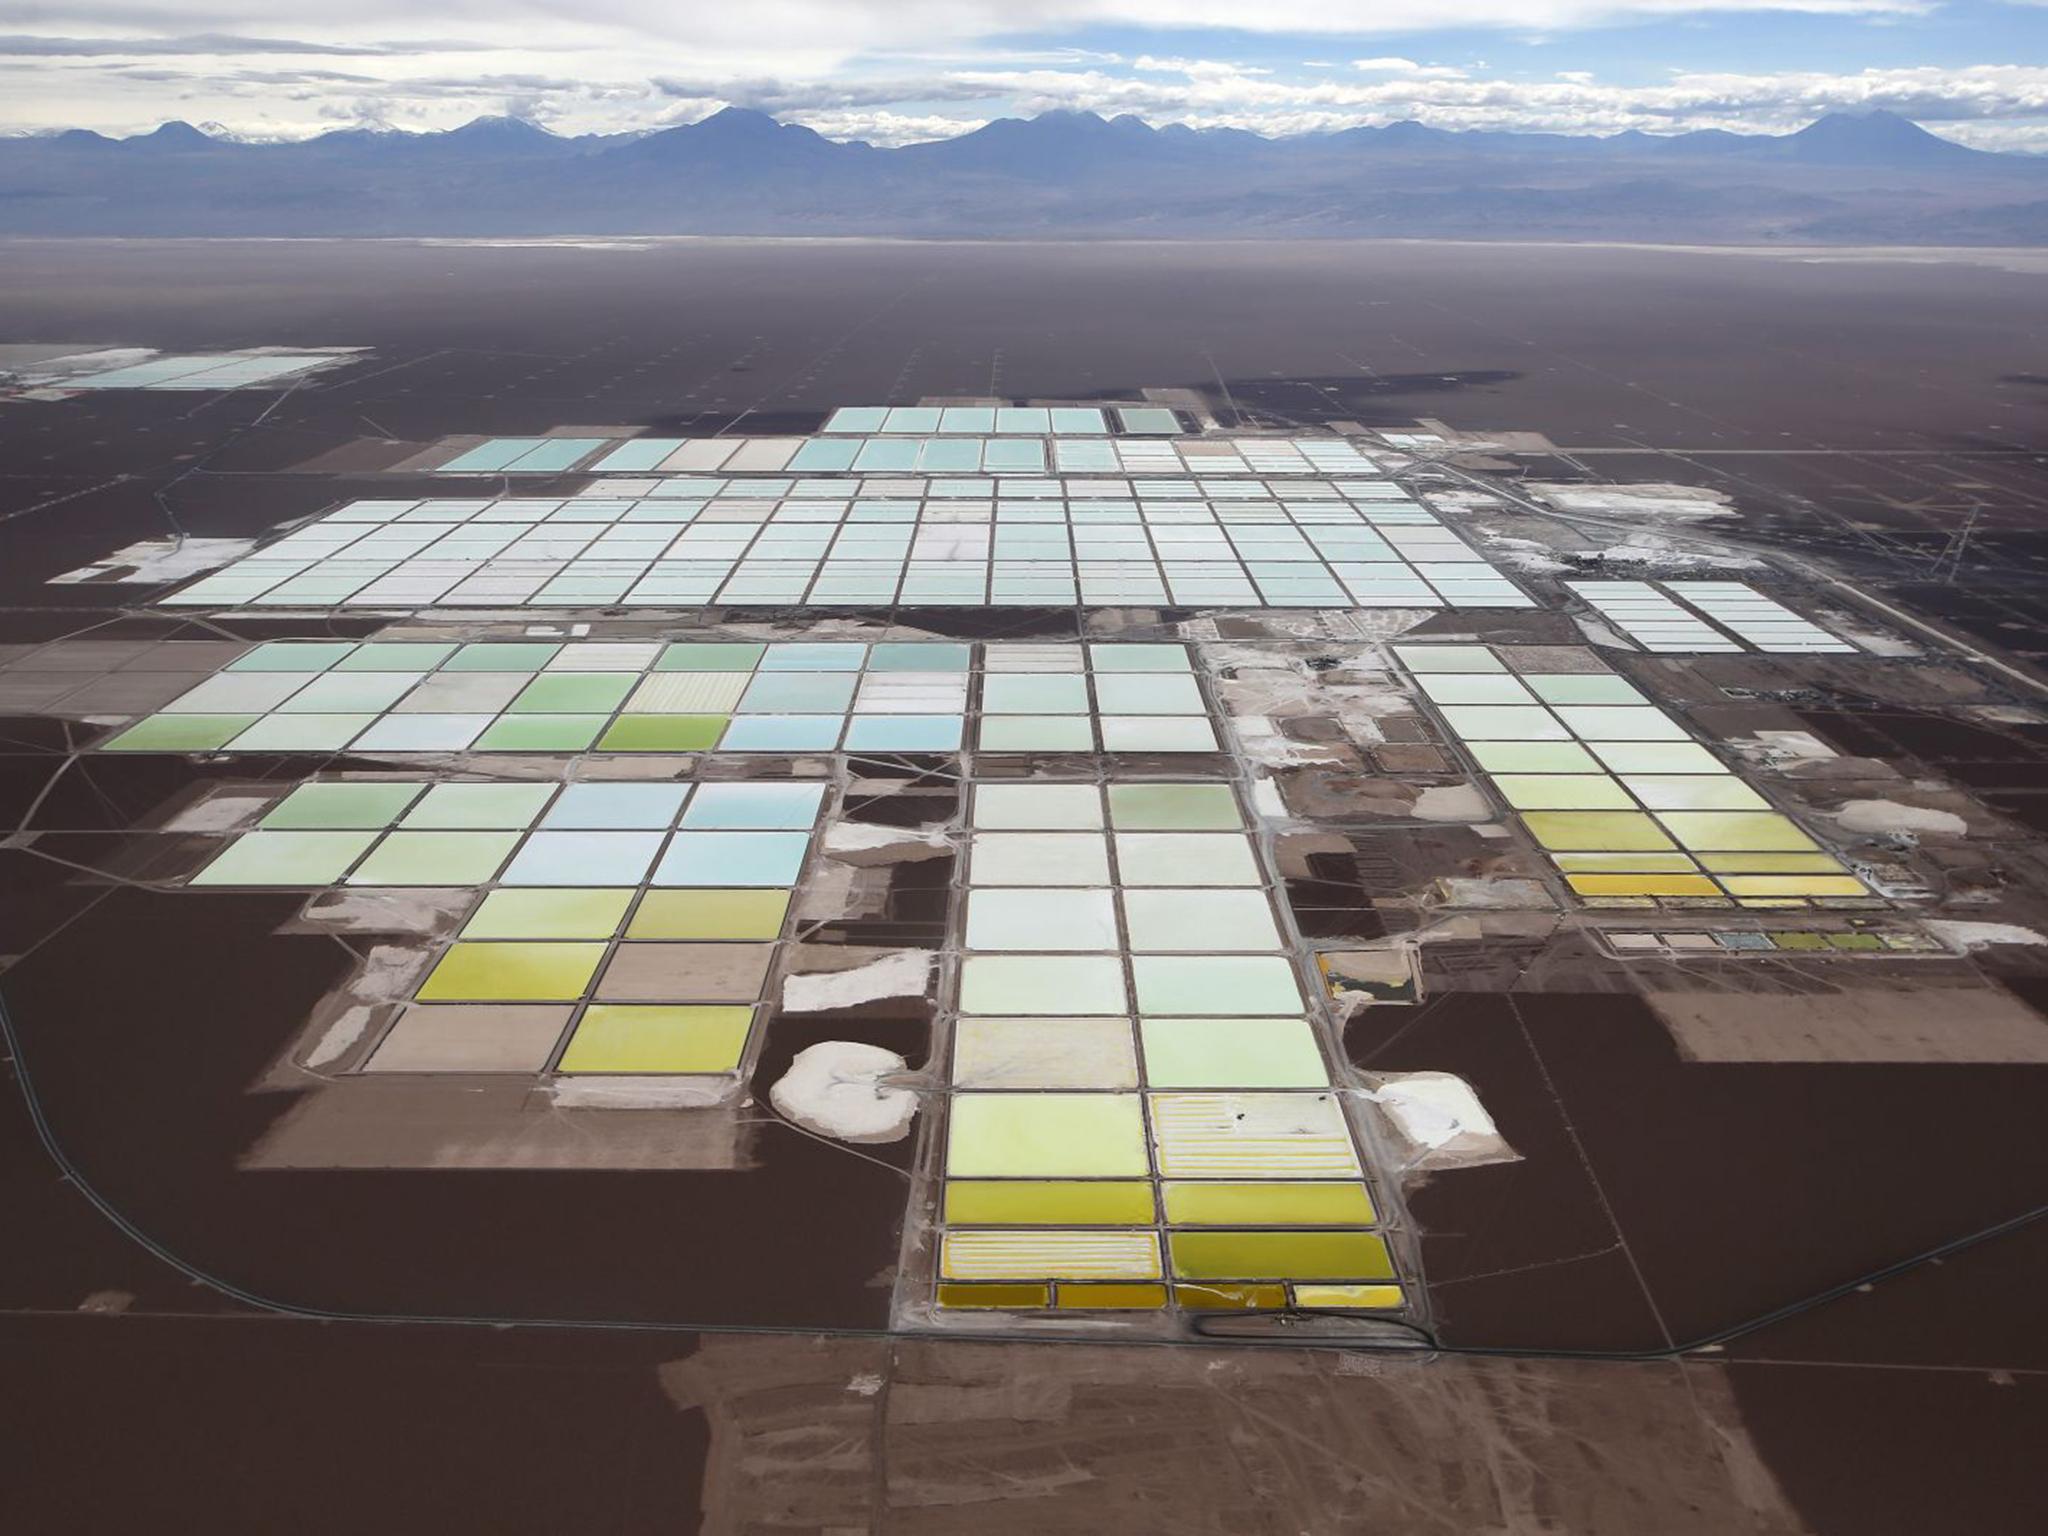 Chile has the largest reserves of lithium in the world, ahead of China, Argentina and Australia